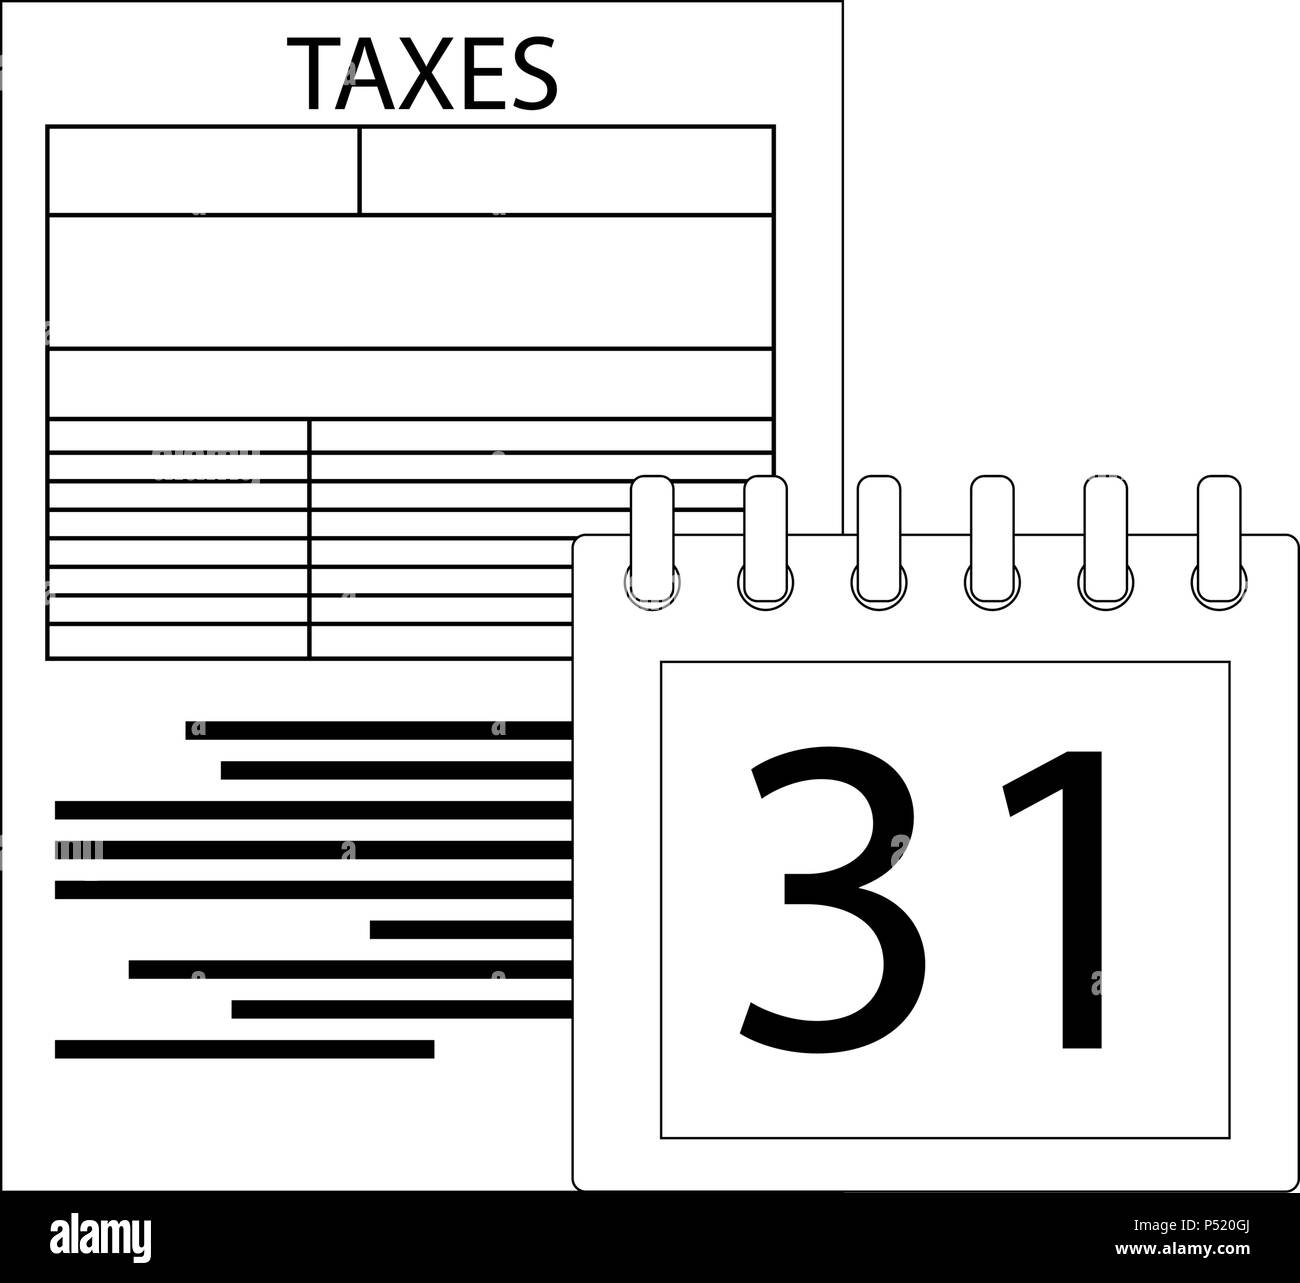 Day for pay tax. Ttime payday, linear government financial tax. Vector illustration Stock Vector